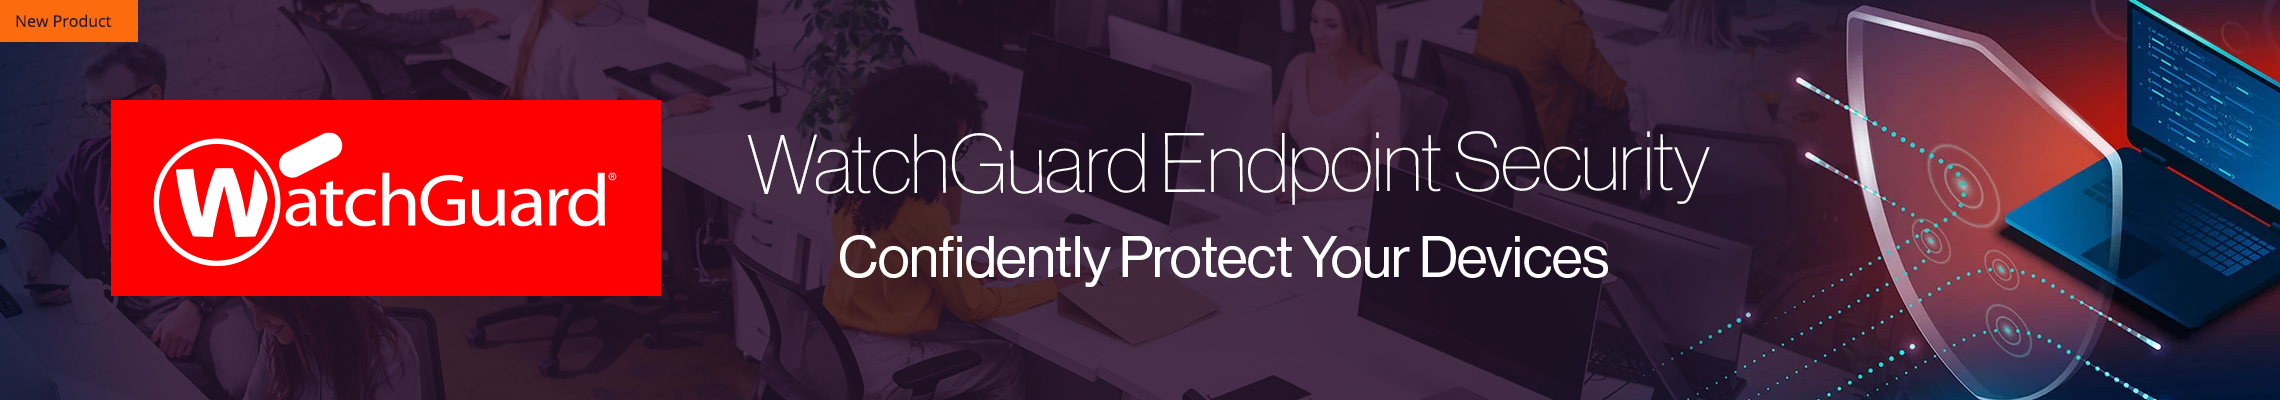 WatchGuard endpoint security